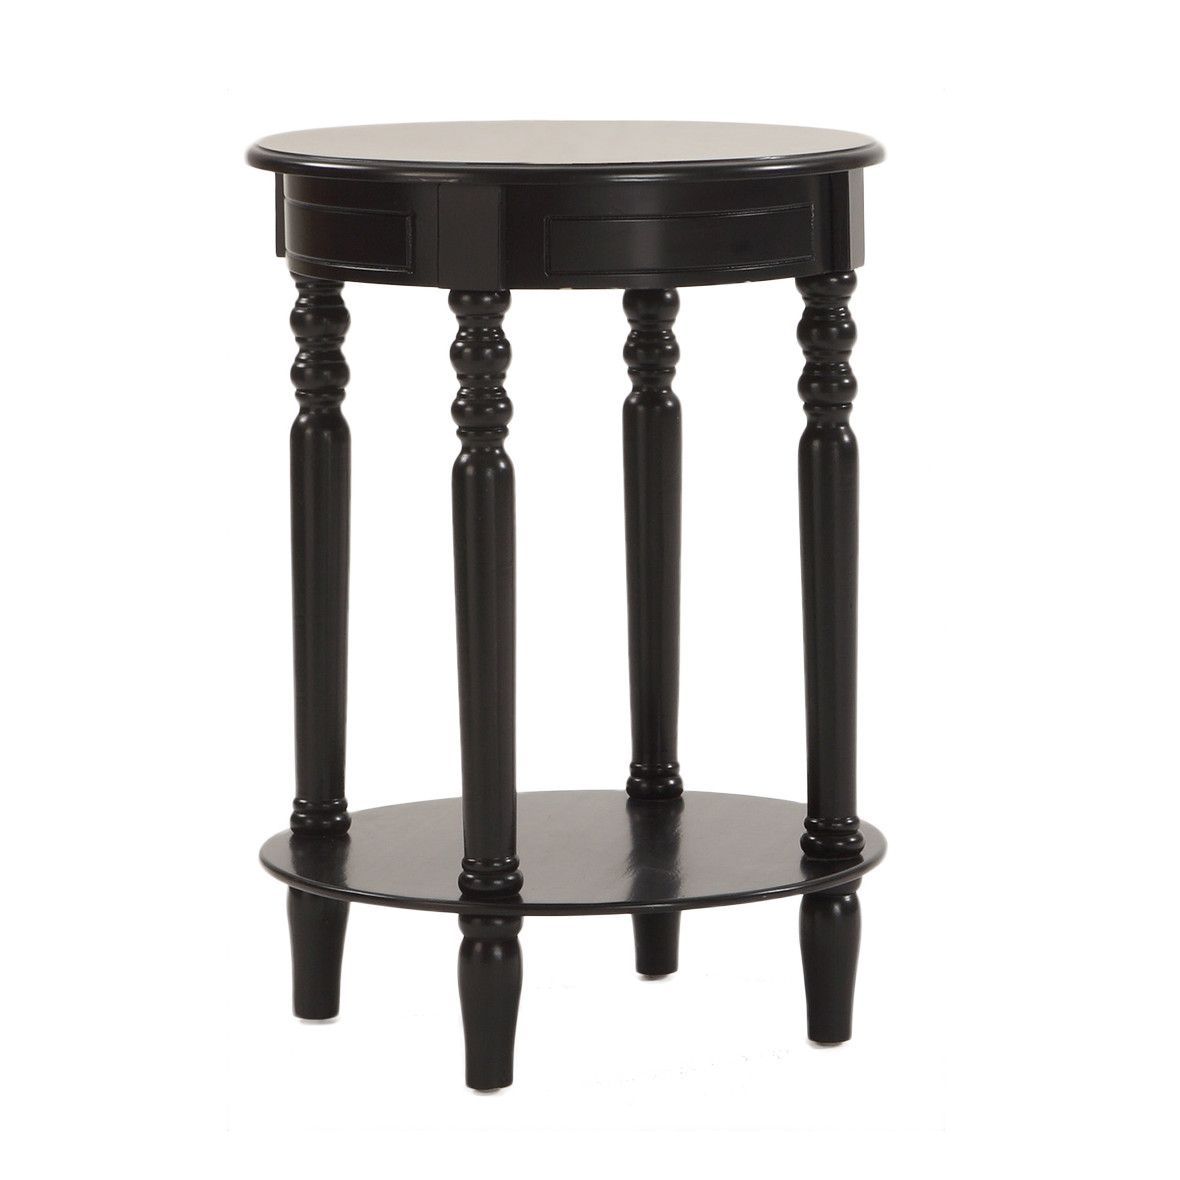 laurel chairside table products simplify pedestal accent end side tables wood floor door threshold round black white and small half moon console furniture coffee ikea nesting with